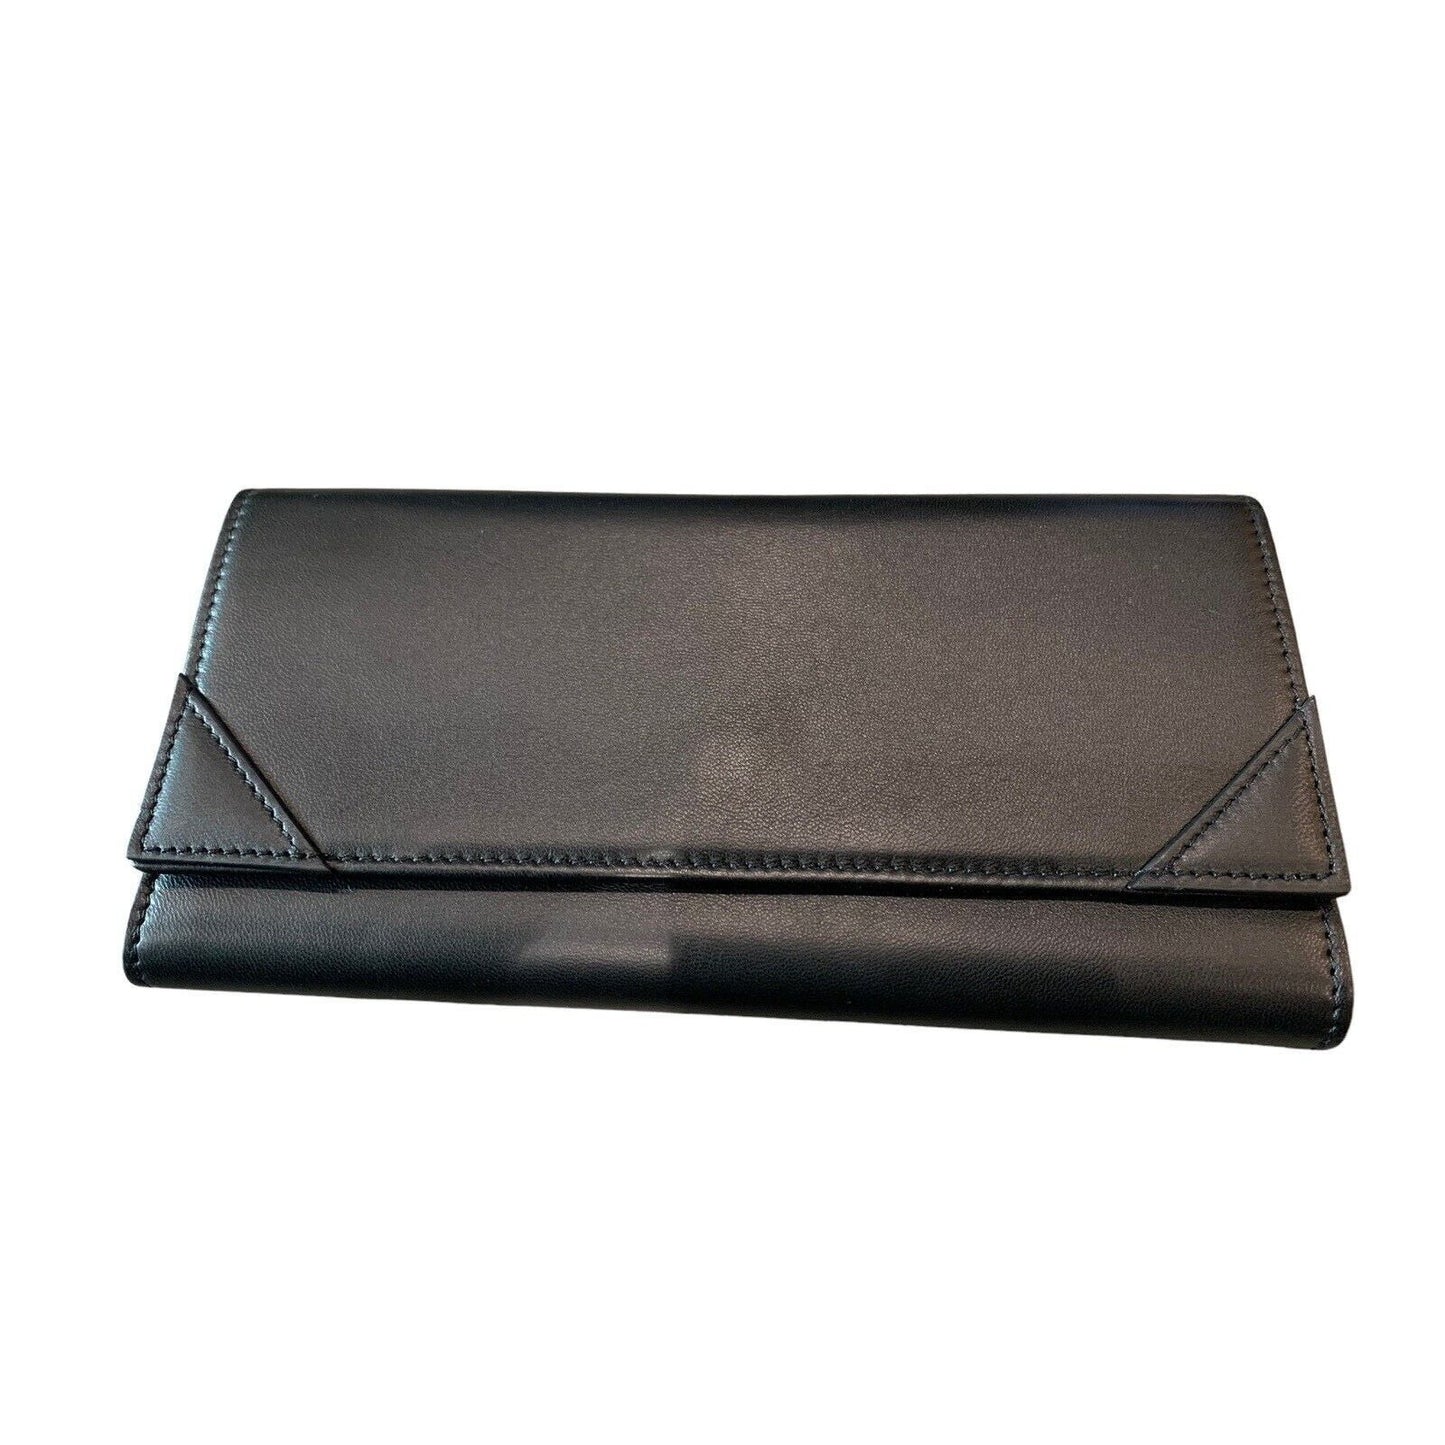 Canipelli Firenze Nappa Leather Classic Snap Envelop Style Wallet